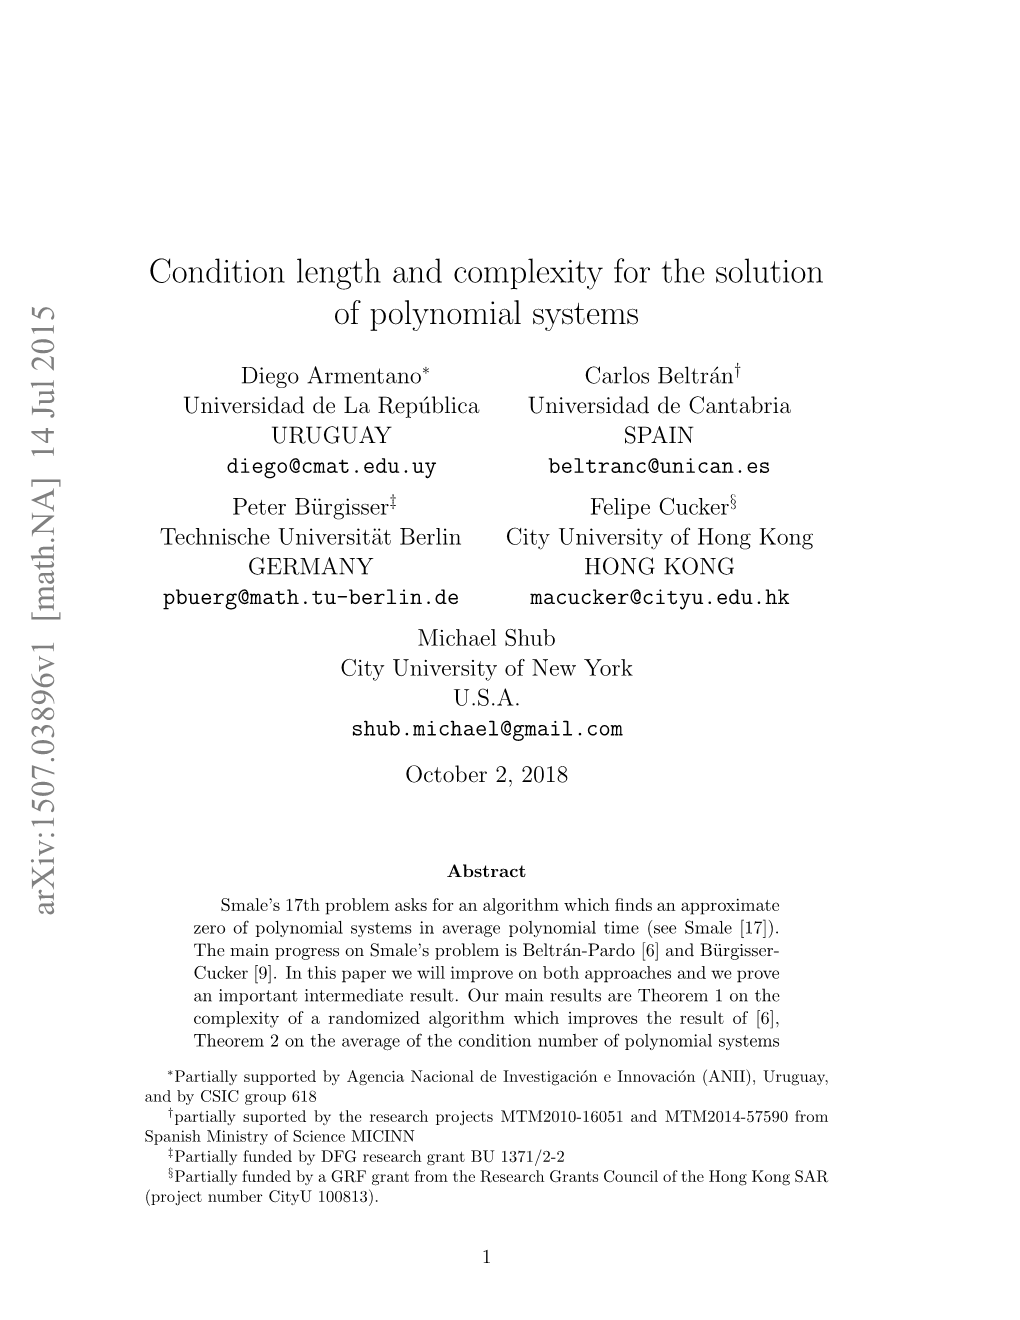 Condition Length and Complexity for the Solution of Polynomial Systems